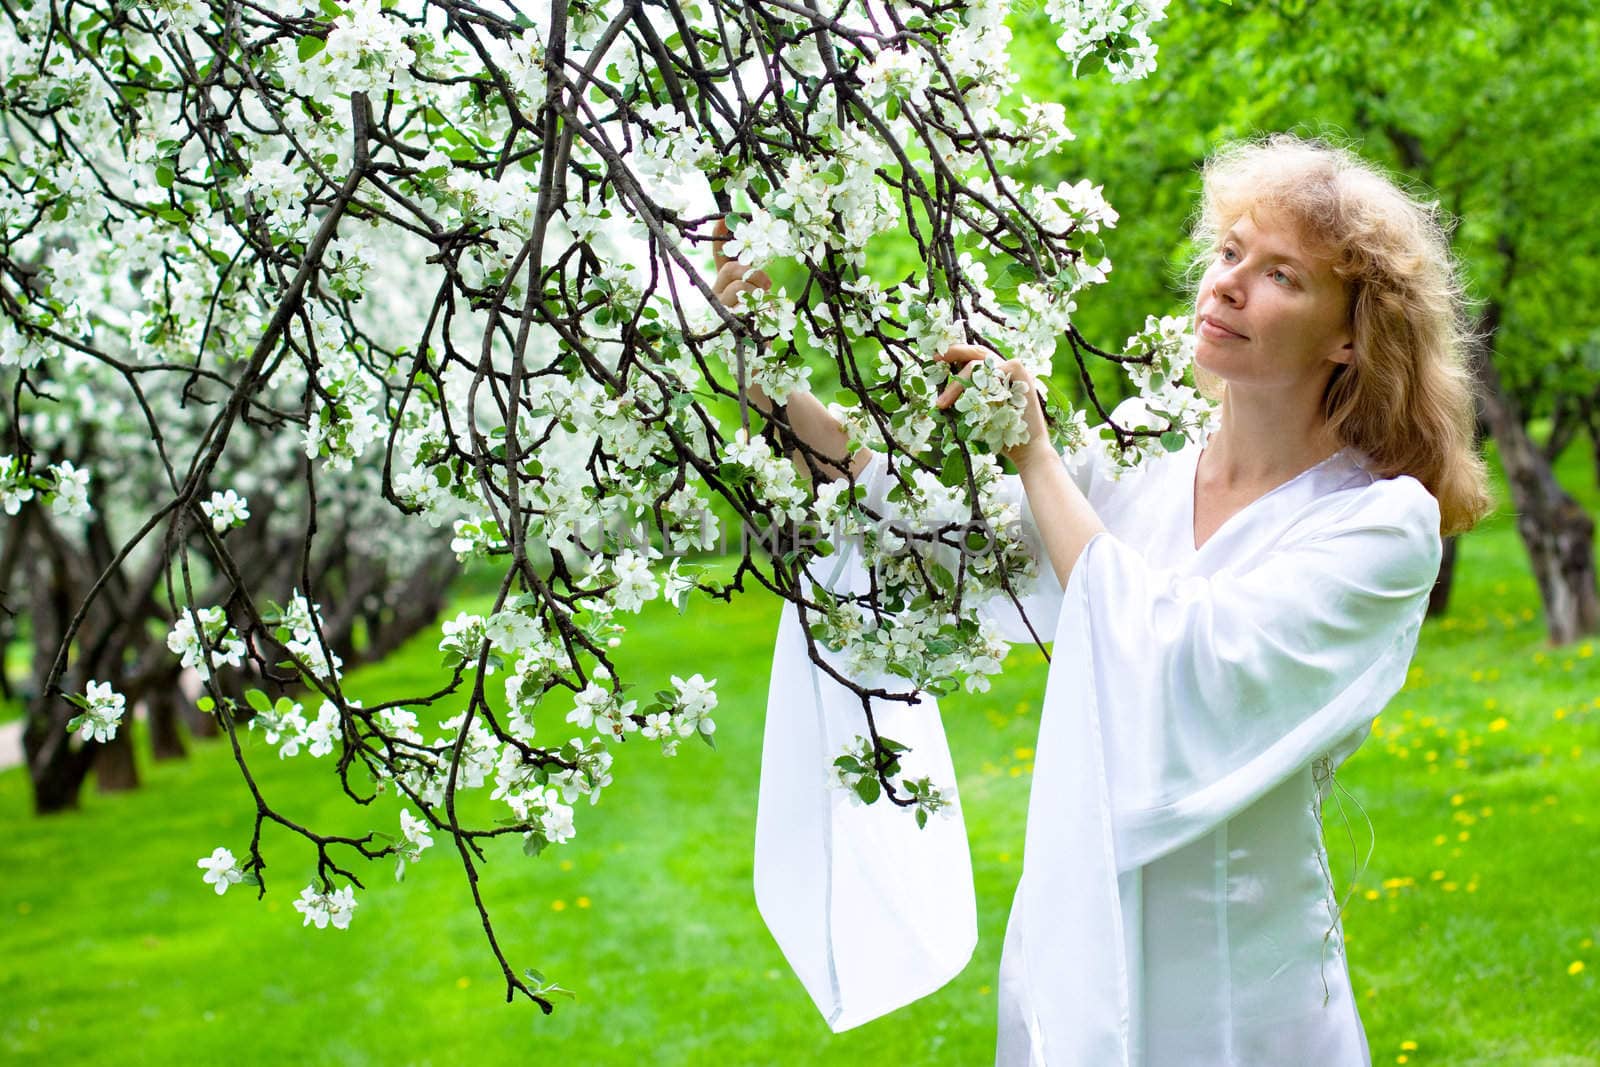 Tne blonde girl in white dress and apple-tree with white flowers
